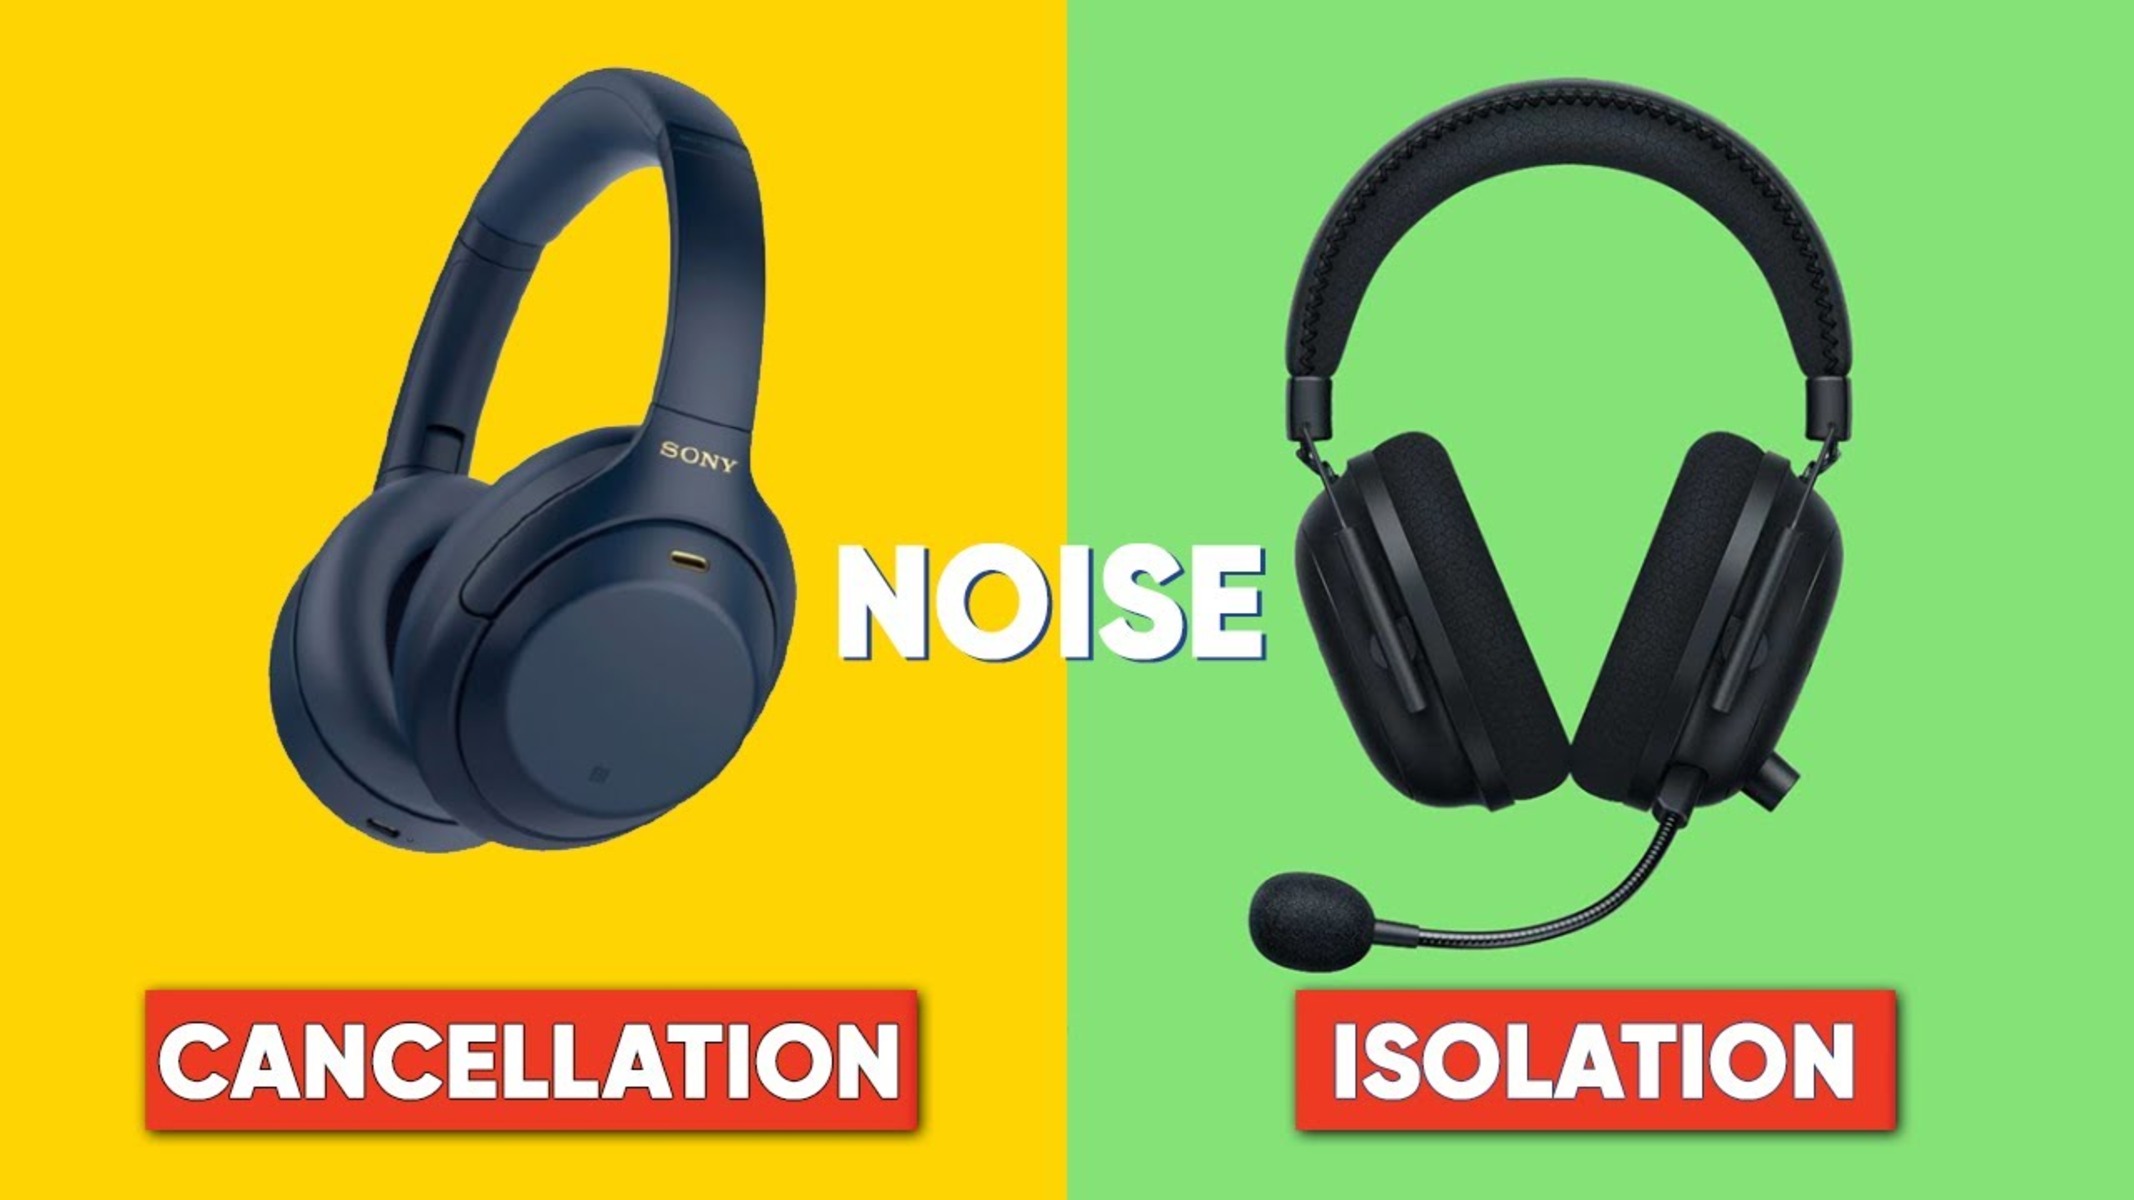 What Is The Difference Between Noise Isolation And Noise Cancellation